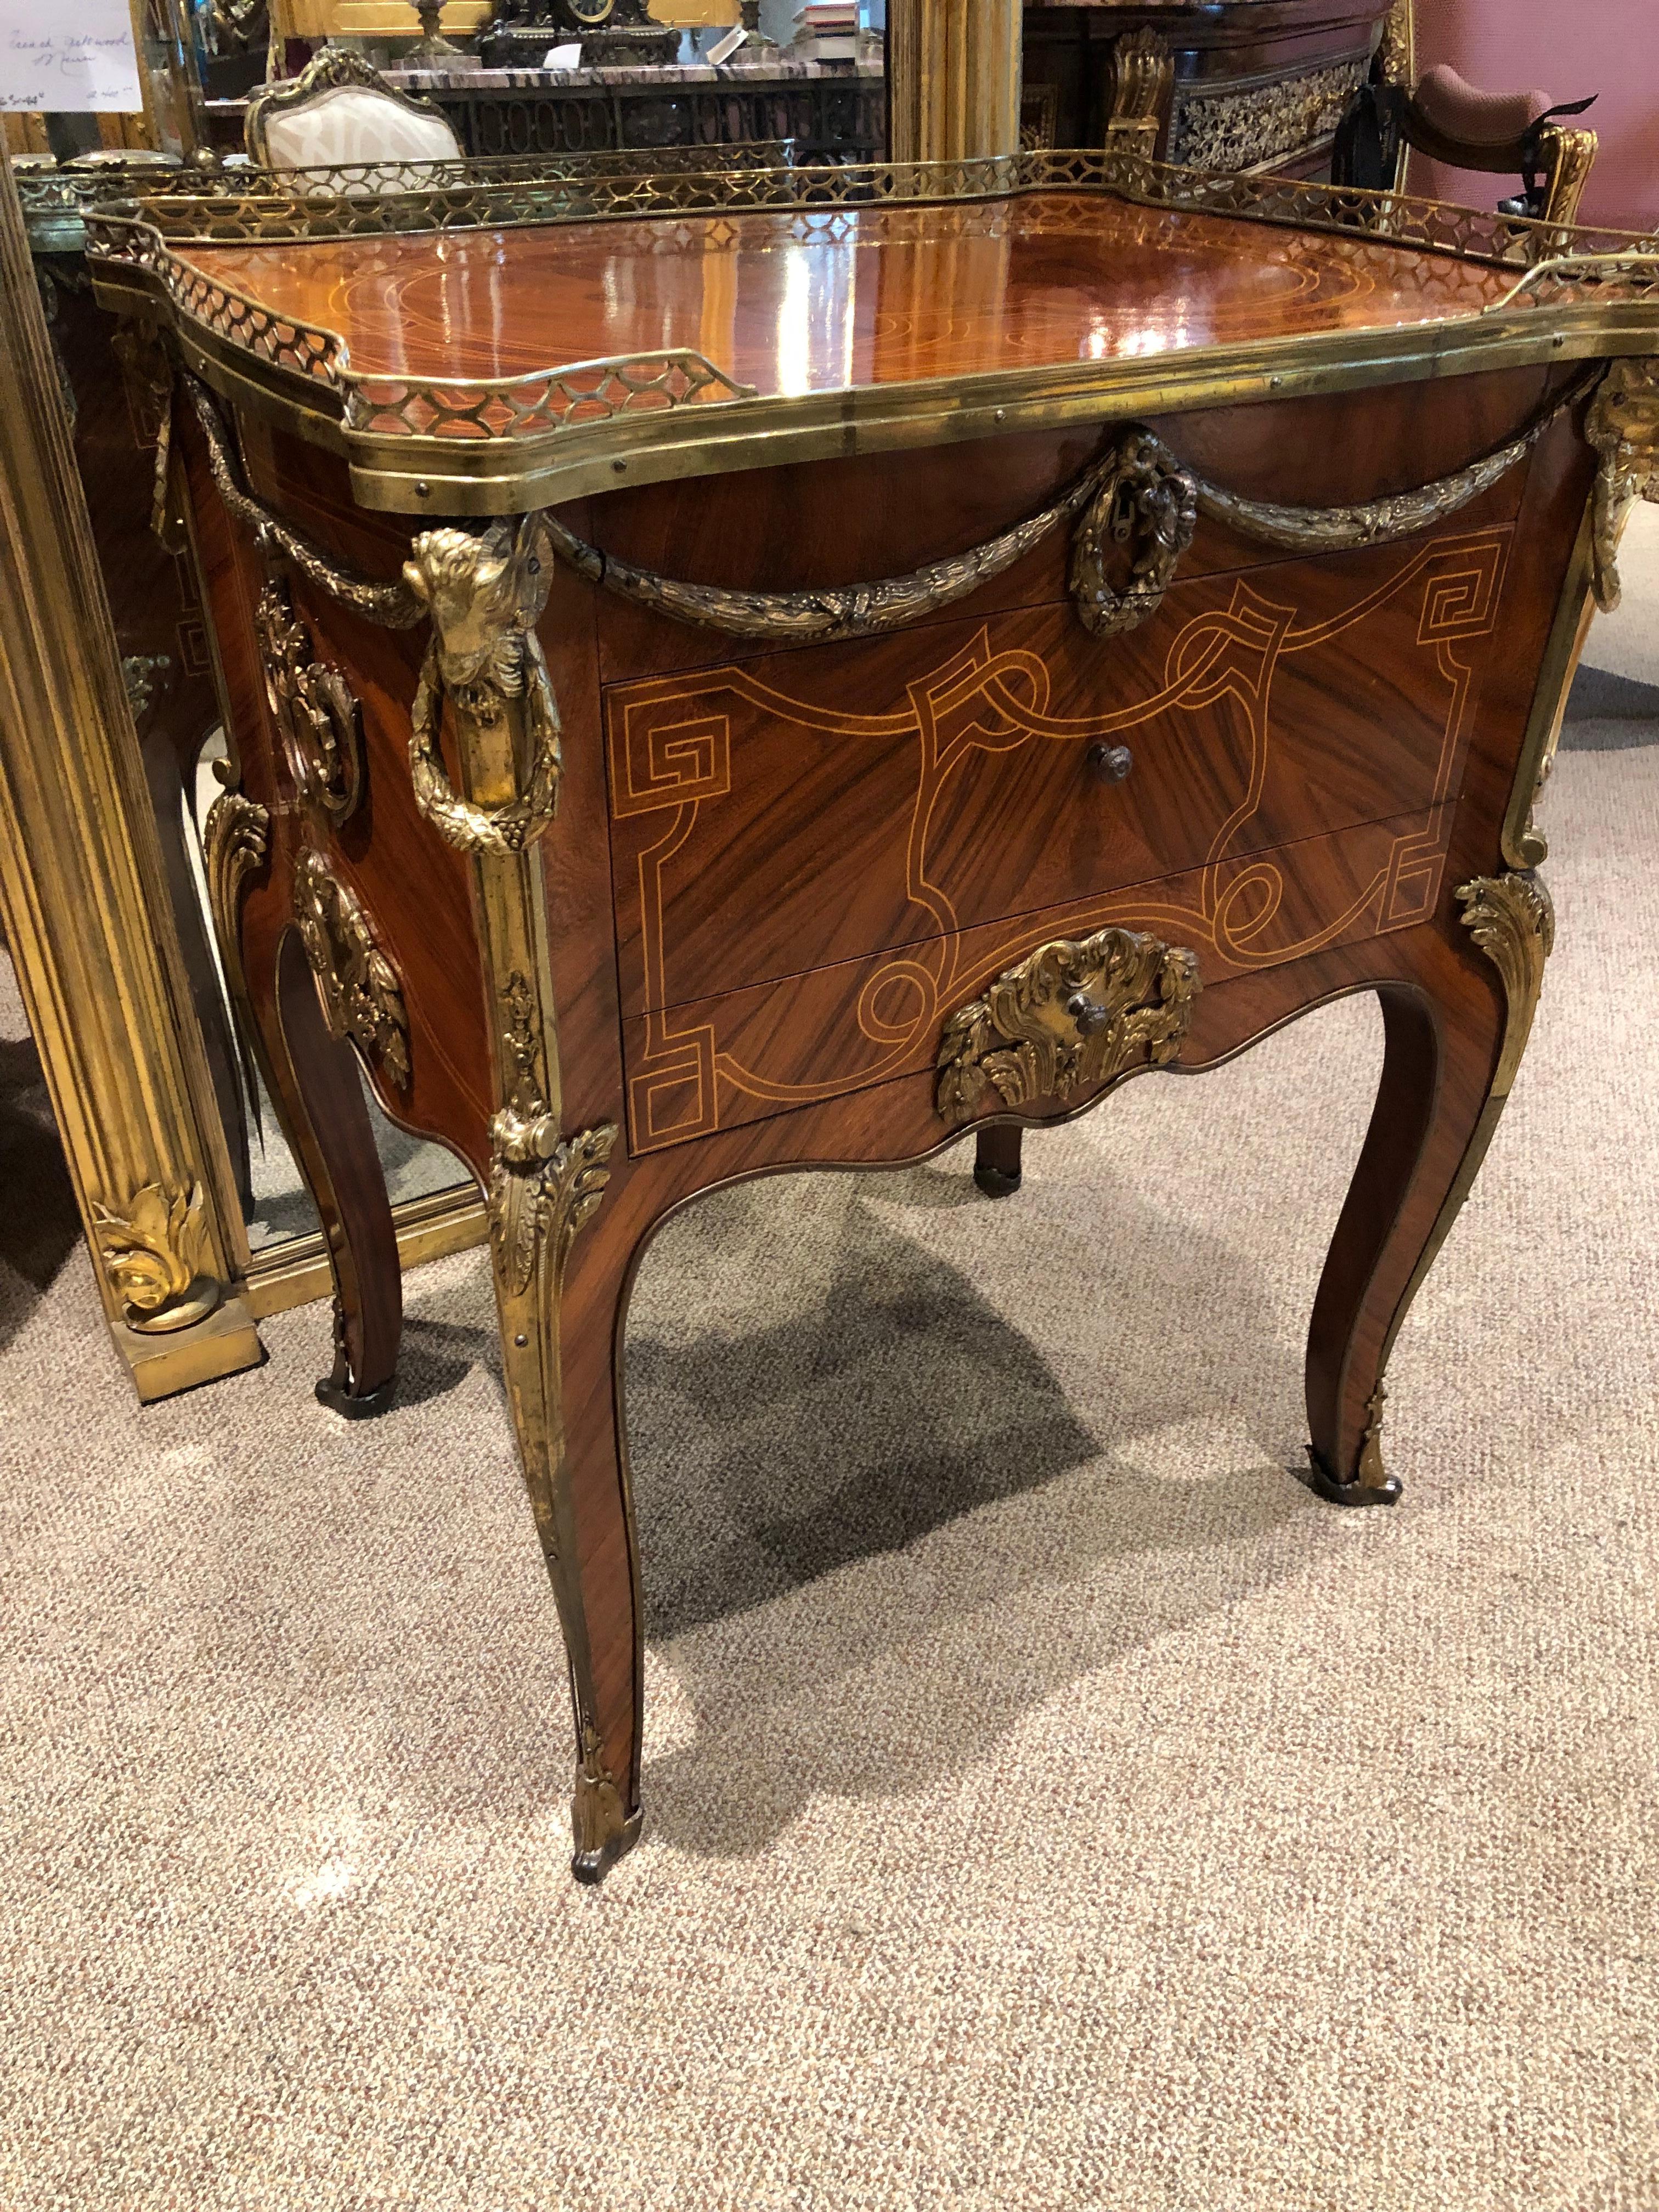 Rectangular top with projecting corners and a
Three-quarter pierced brass gallery, above a
Conforming case fitted with three drawers, all
With applied ormolu mounts, raised on cabriole
Legs ending in sabots, the whole with decorative
Inlaid